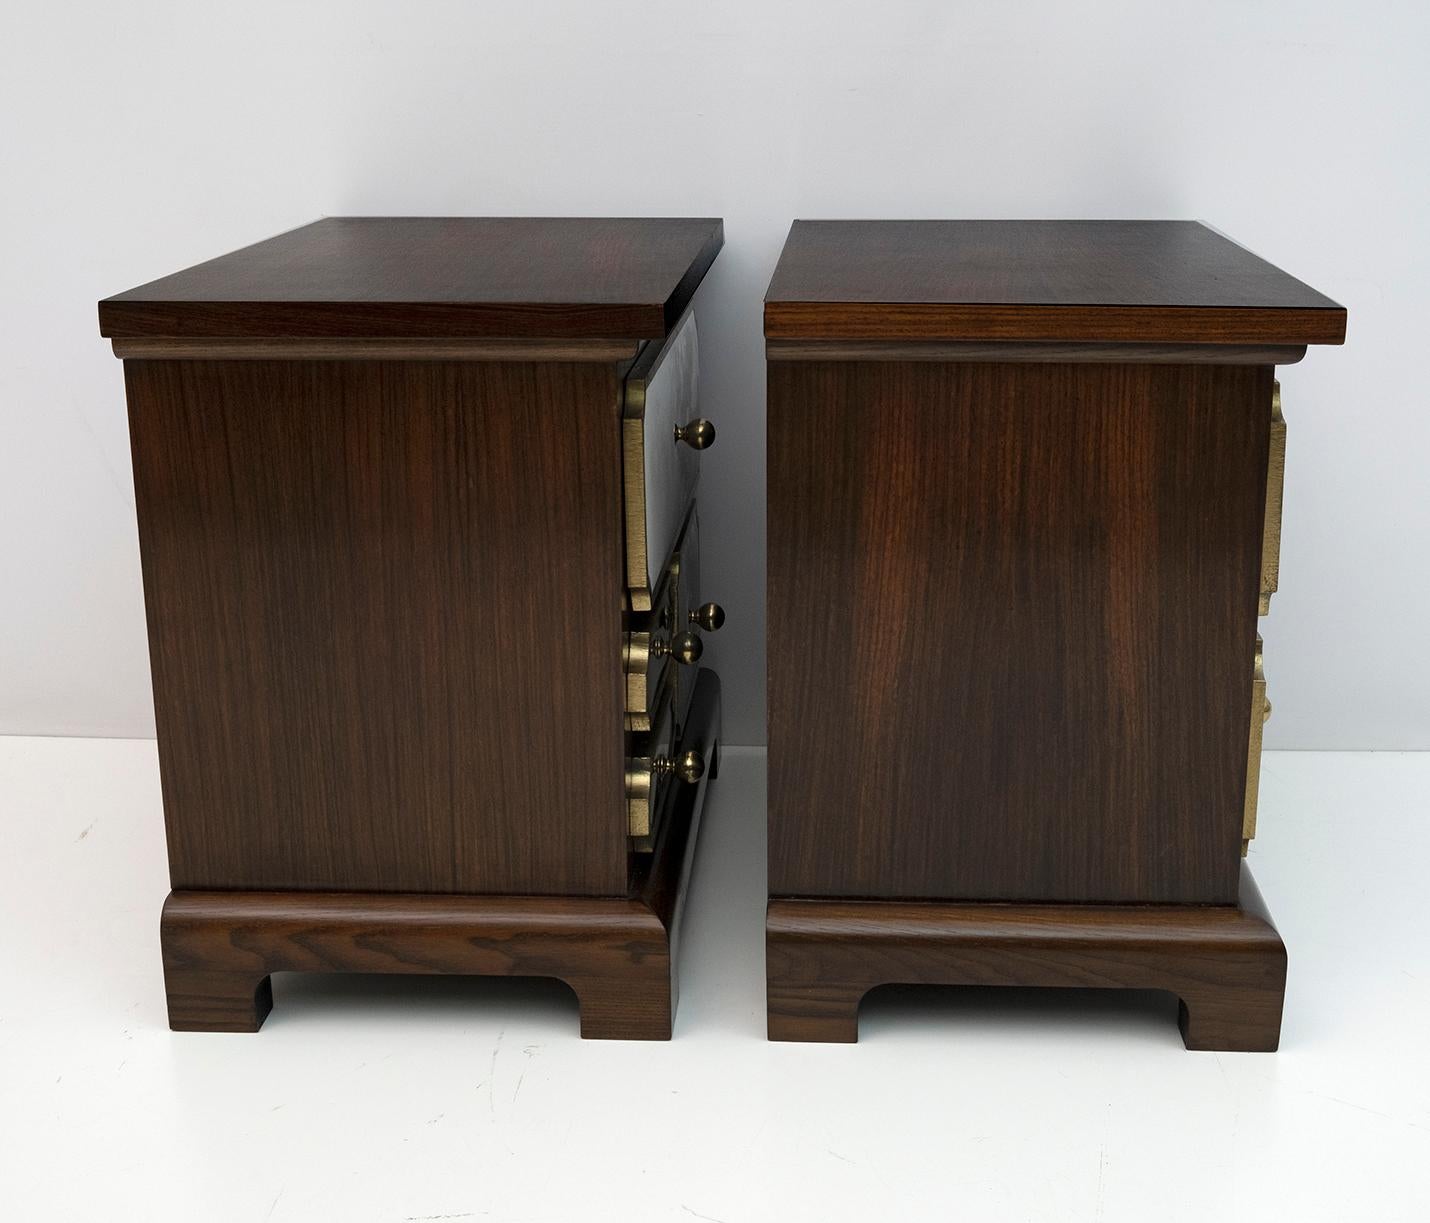 Pair of Luciano Frigerio Mid-Century Modern Italian Bedside Tables, 1960s For Sale 2